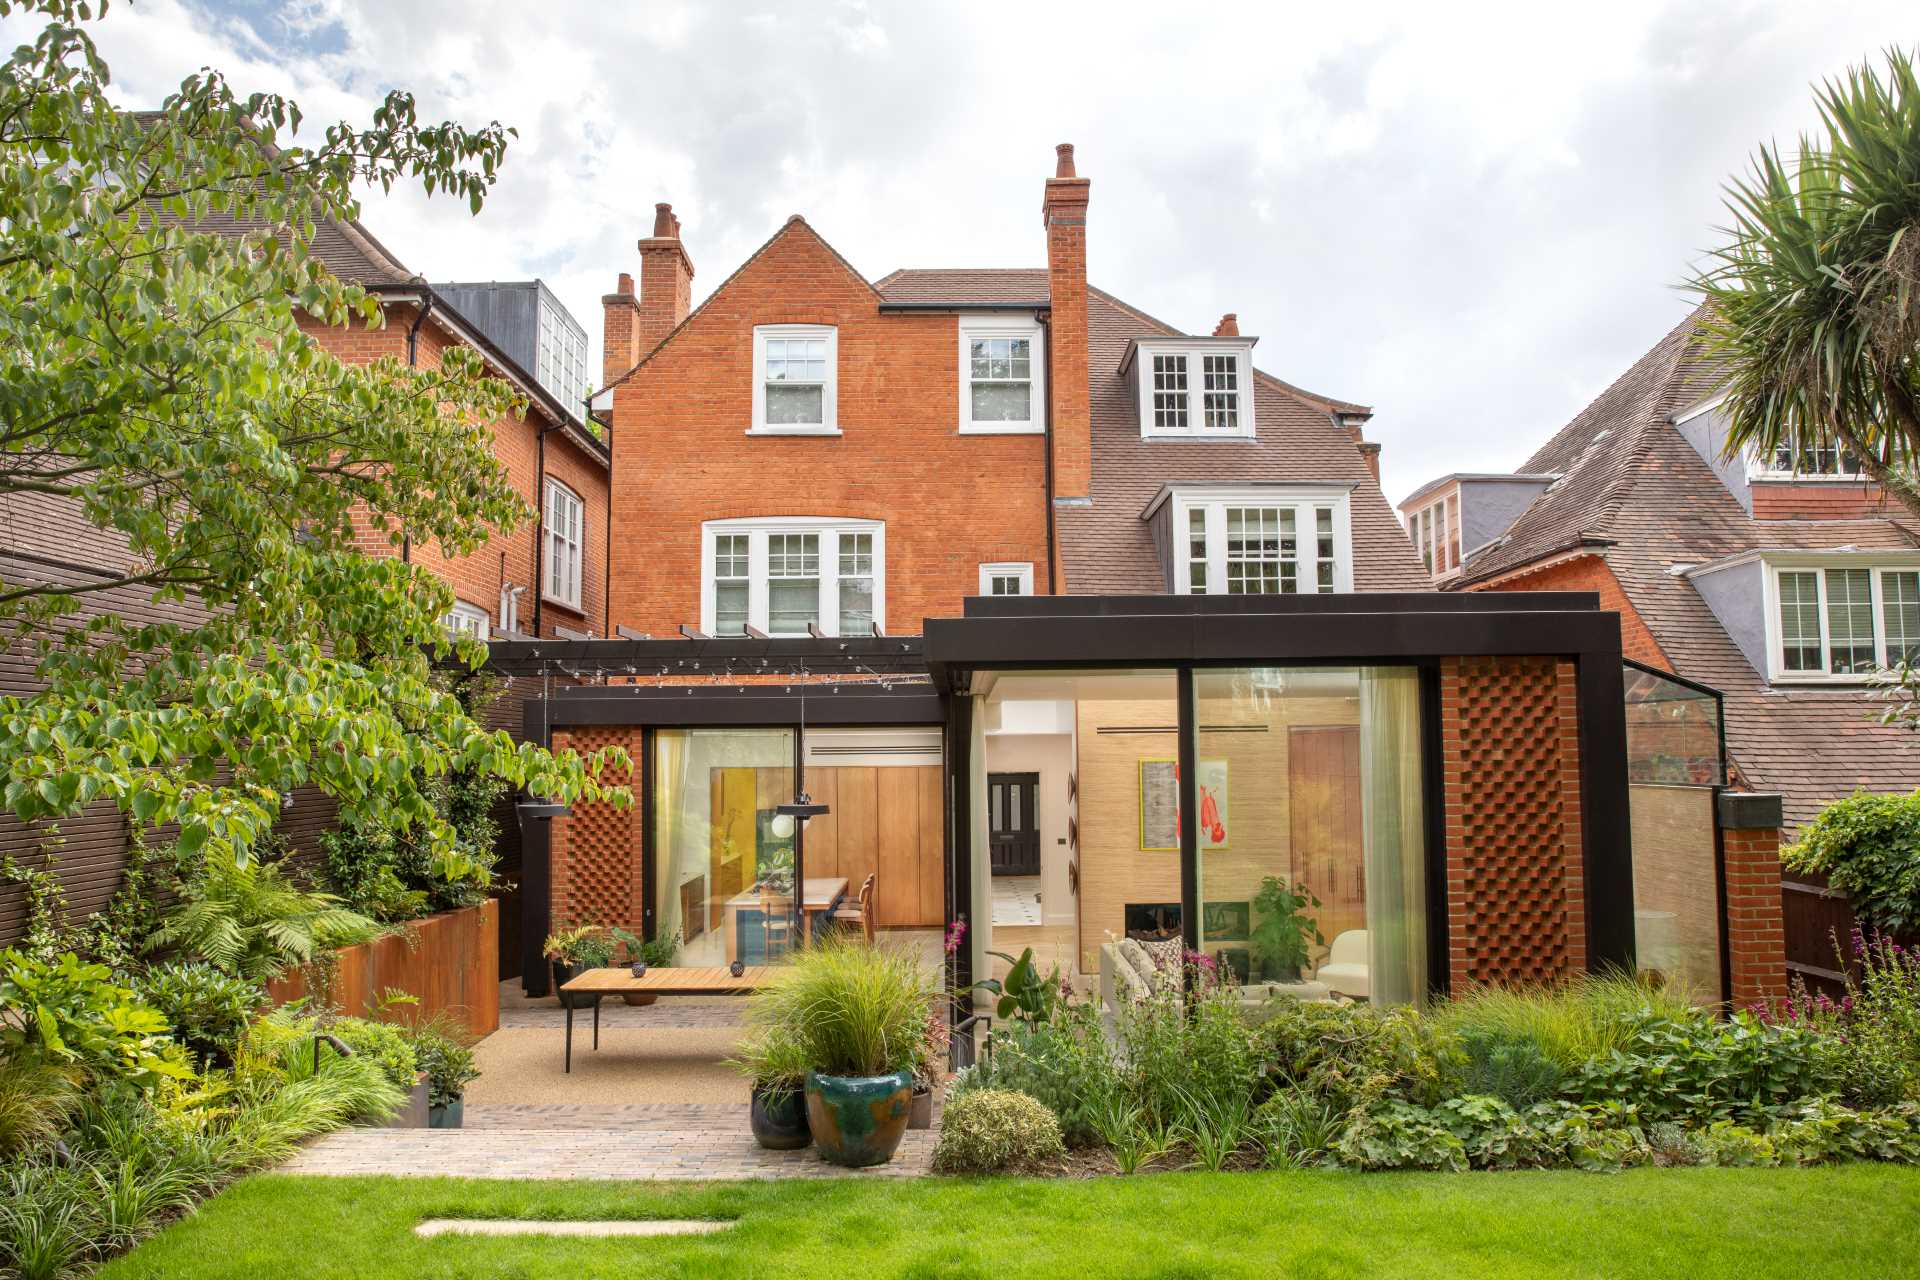 The architects removed the existing conservatory of this home and added a new rear extension with an integrated strip of glass, that separates the original building from the contemporary extension.